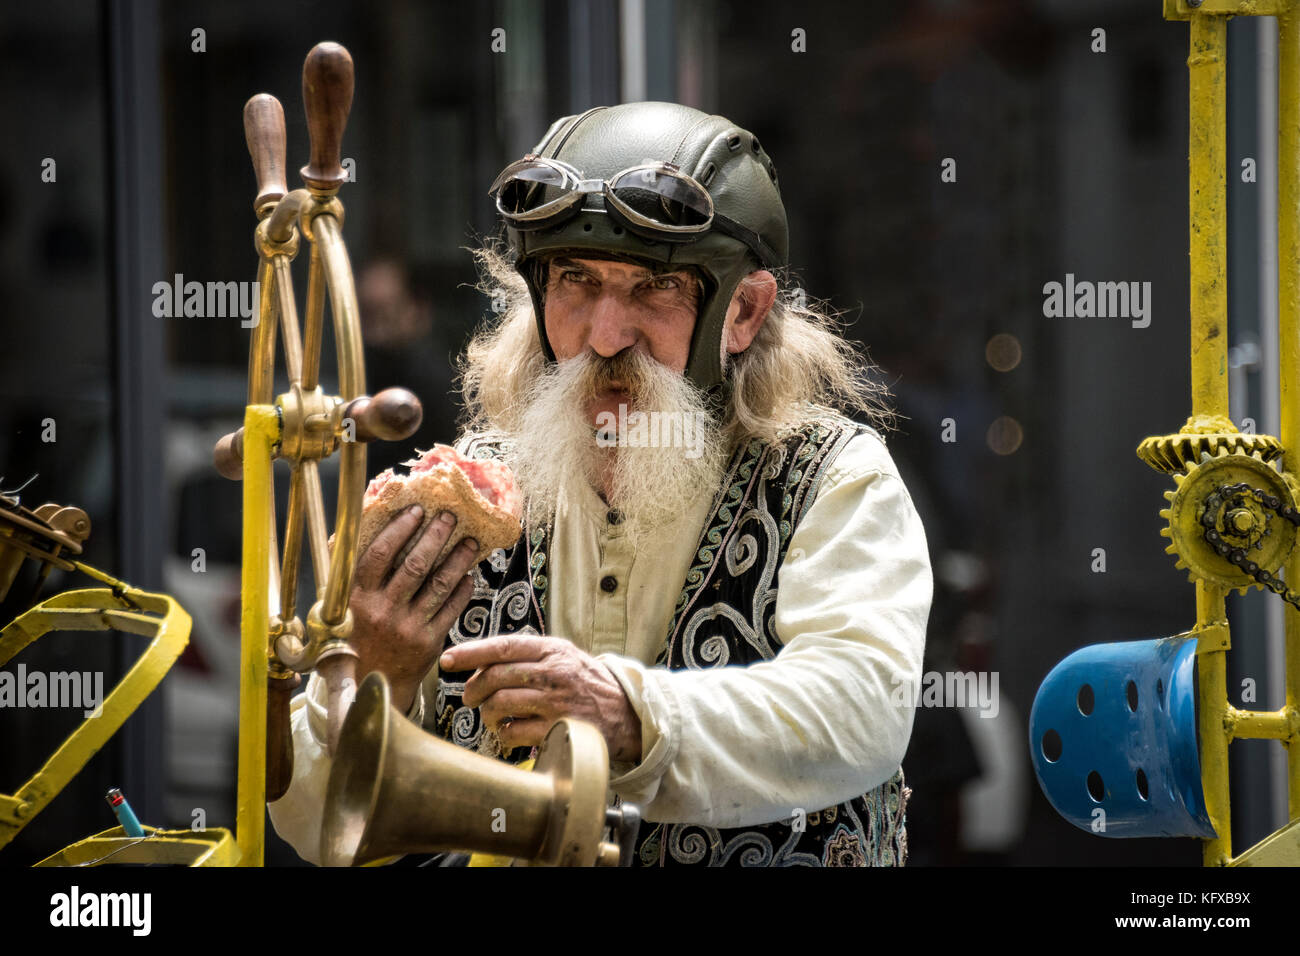 Parisian man on his steampunk time travel bicycle eating a sandwich, Paris Stock Photo